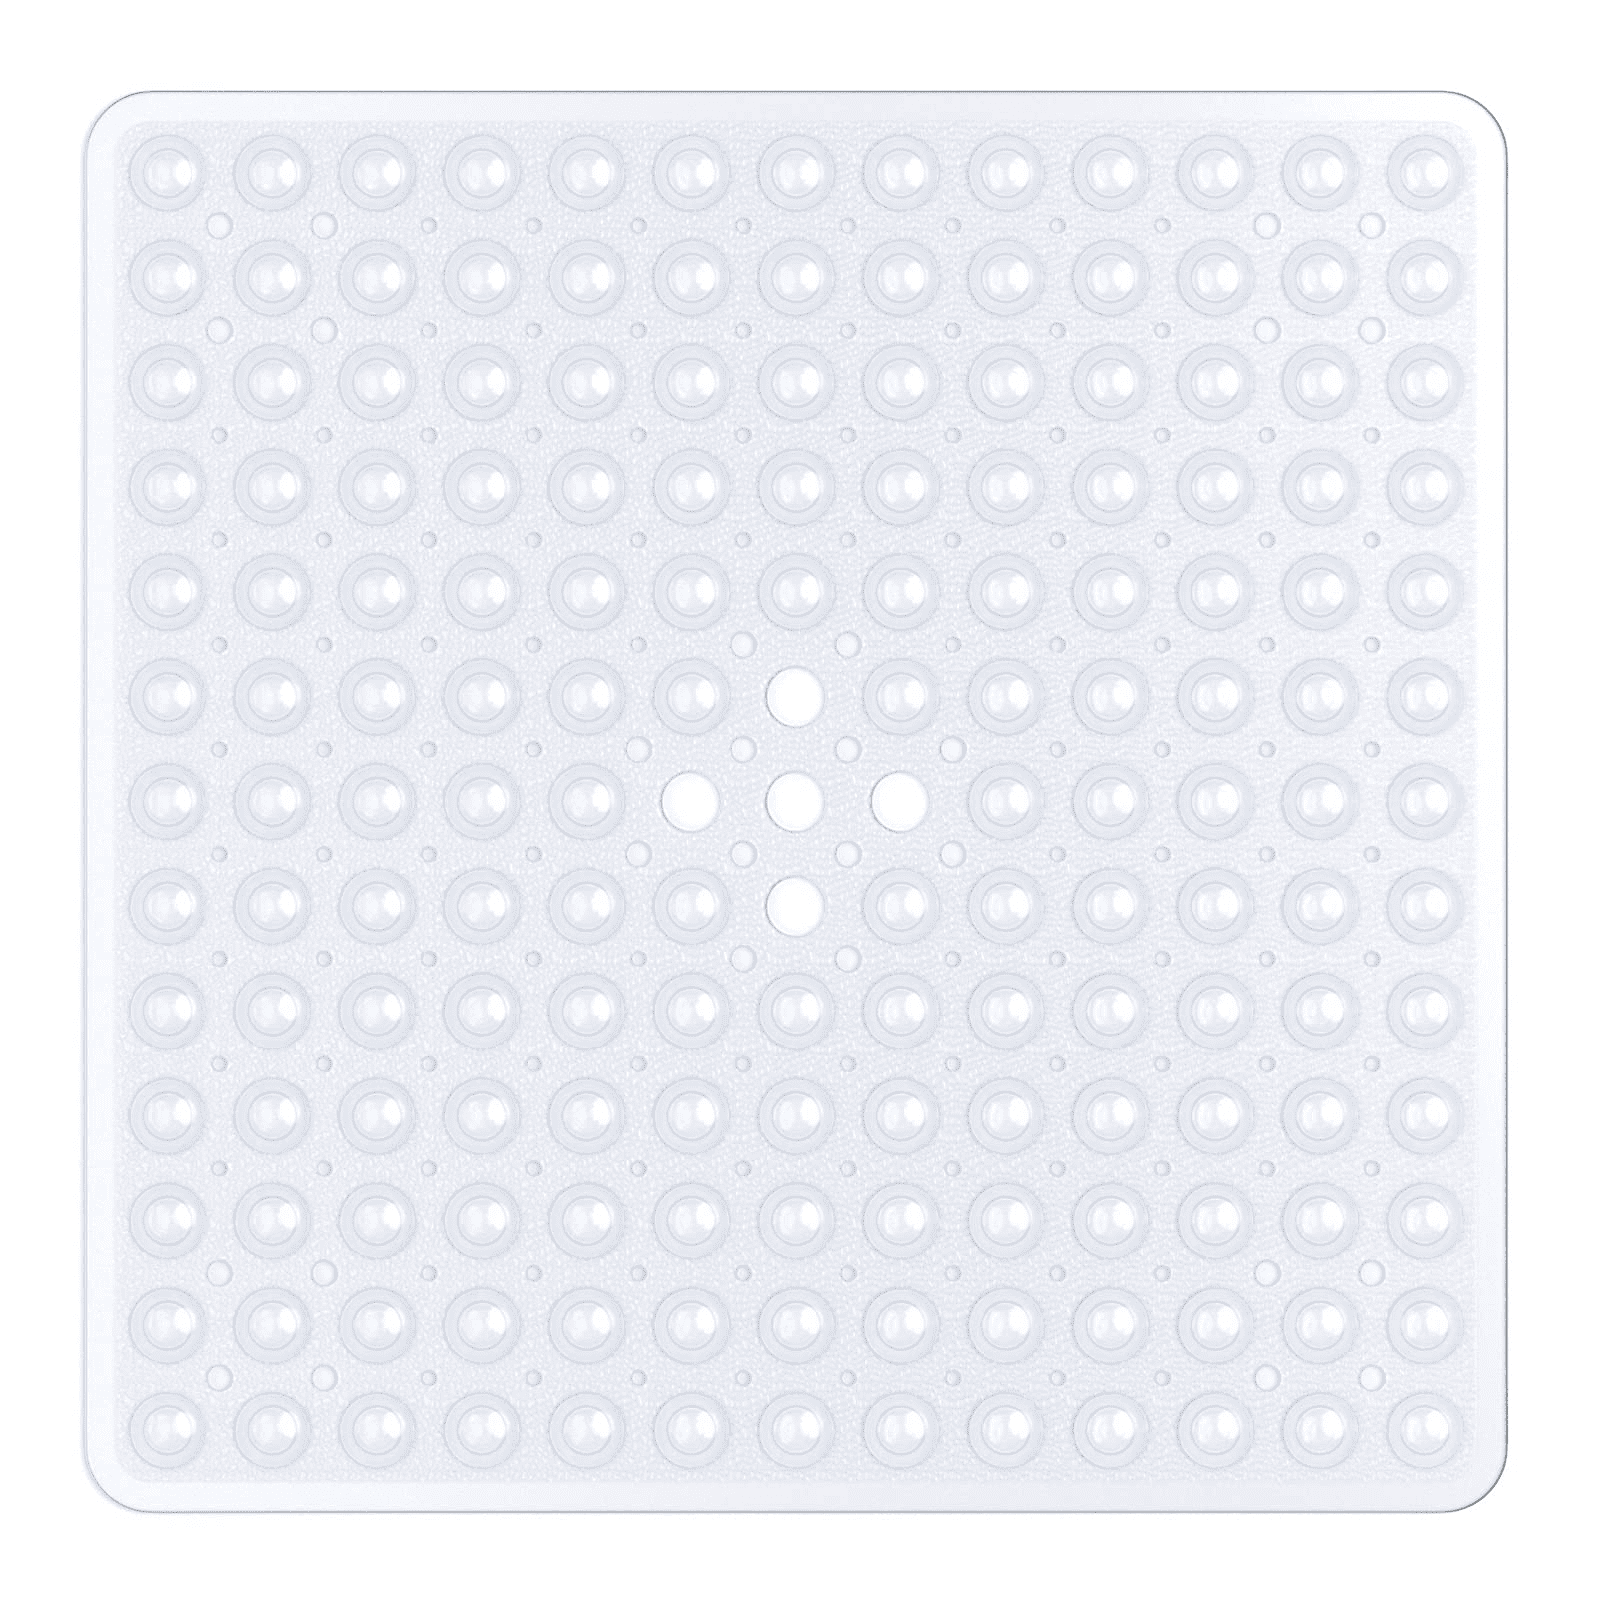 Tranquil Beauty 21 x 21 White Curved Non-Slip Shower and Bath Mats with  Suction Cups Ideal for Kids & Elderly